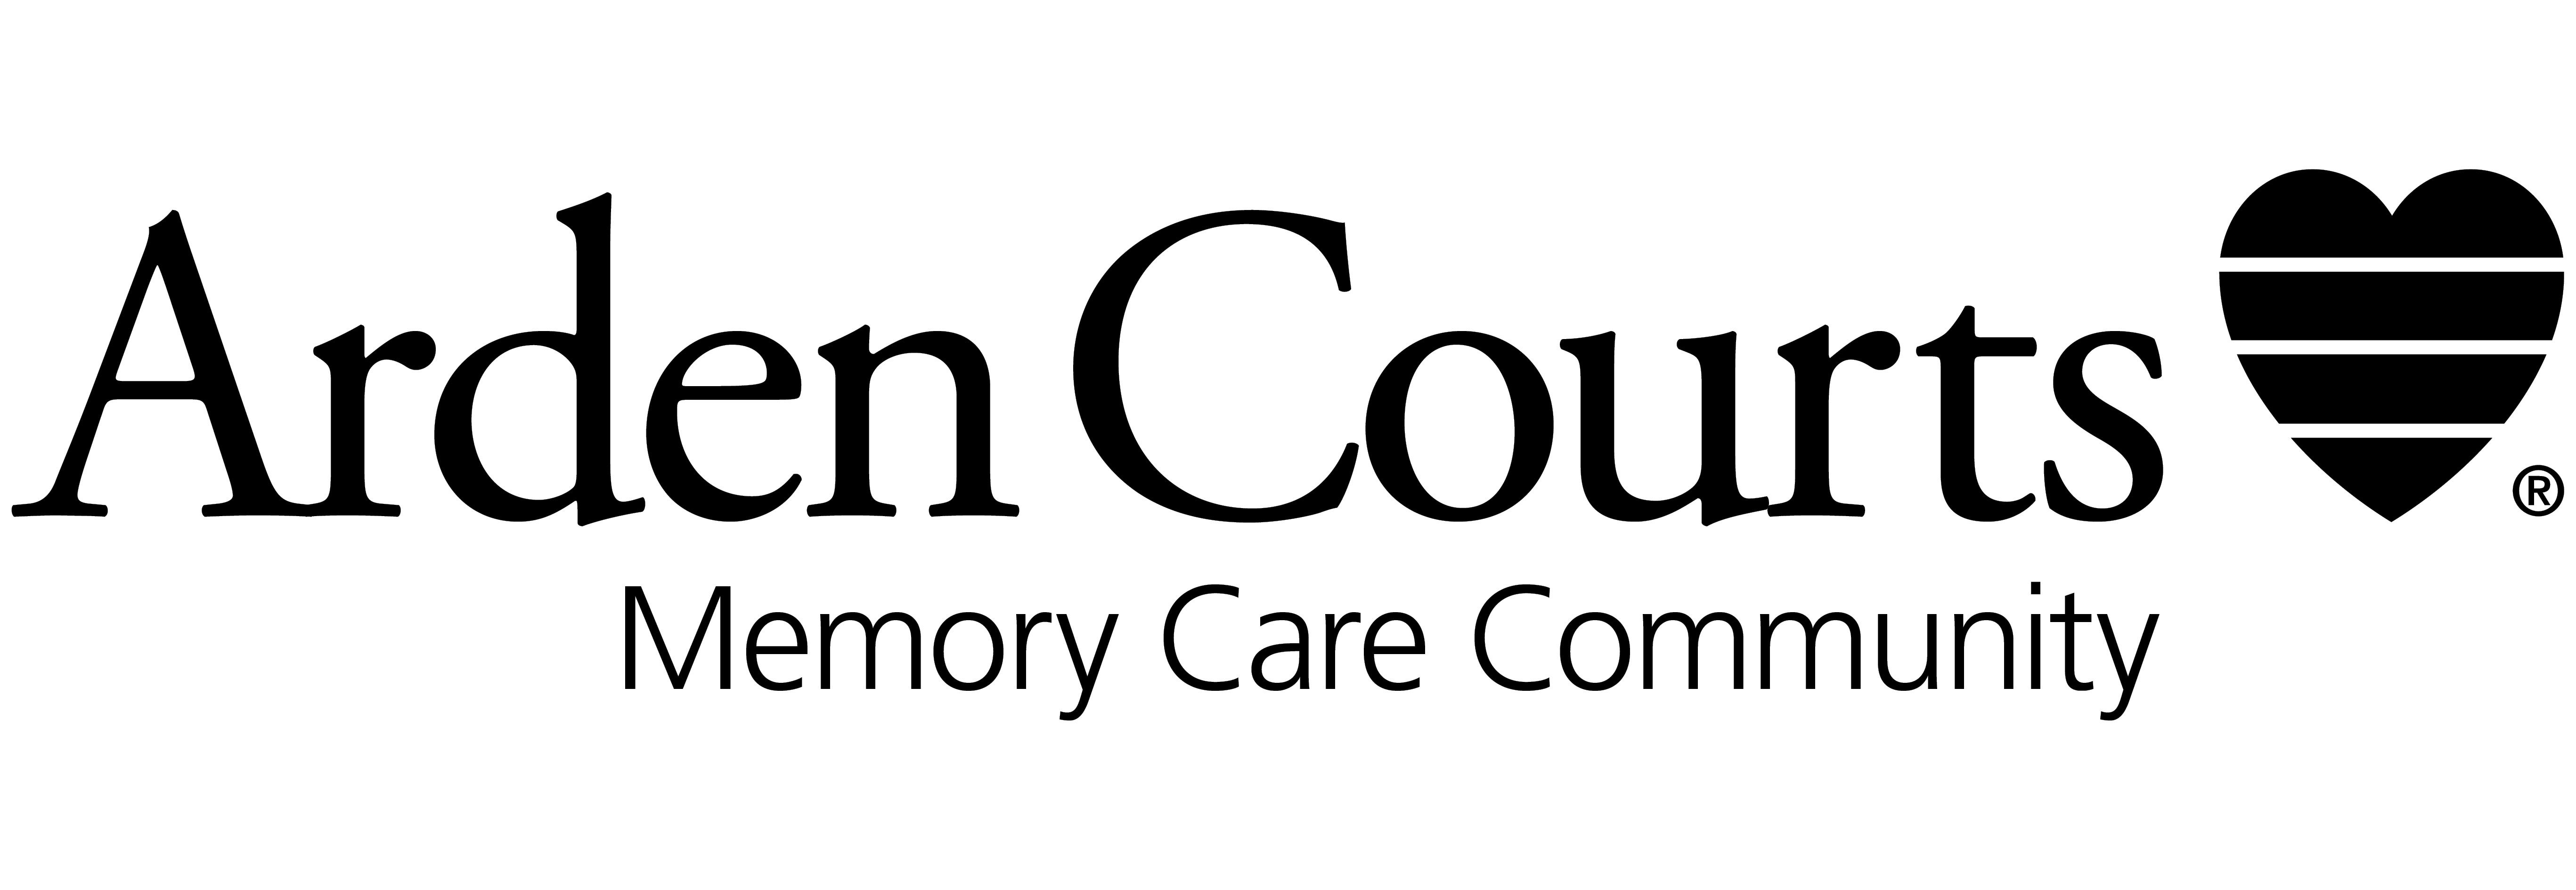 Arden Courts: Memory Care Community